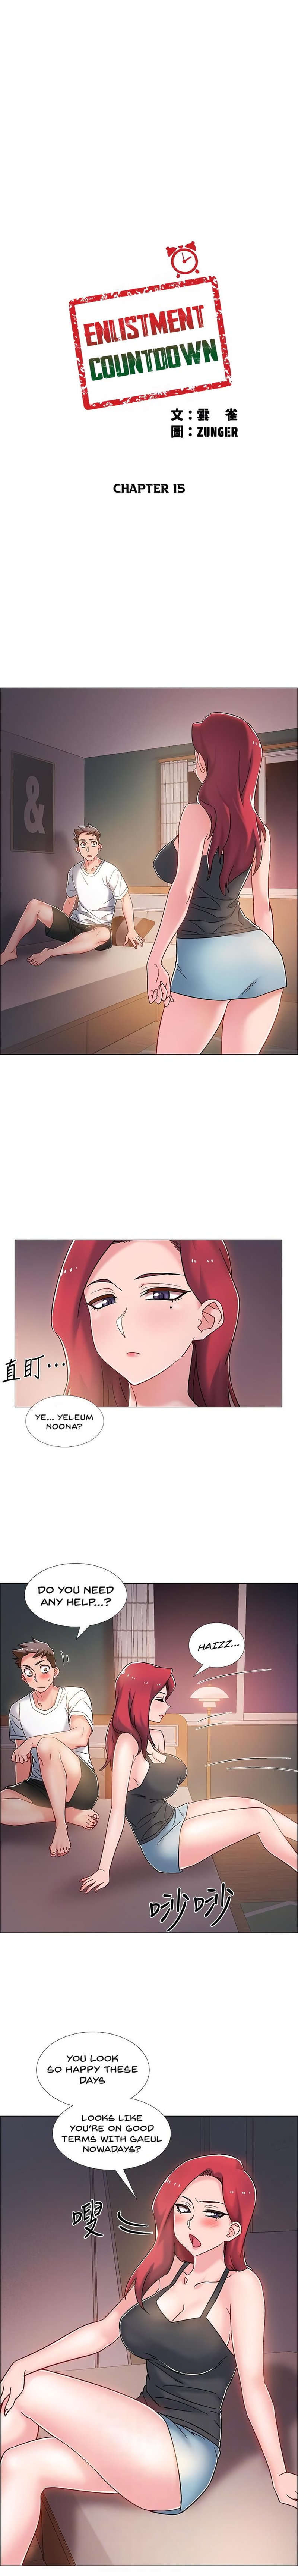 Enlistment Countdown - Chapter 15 Page 3